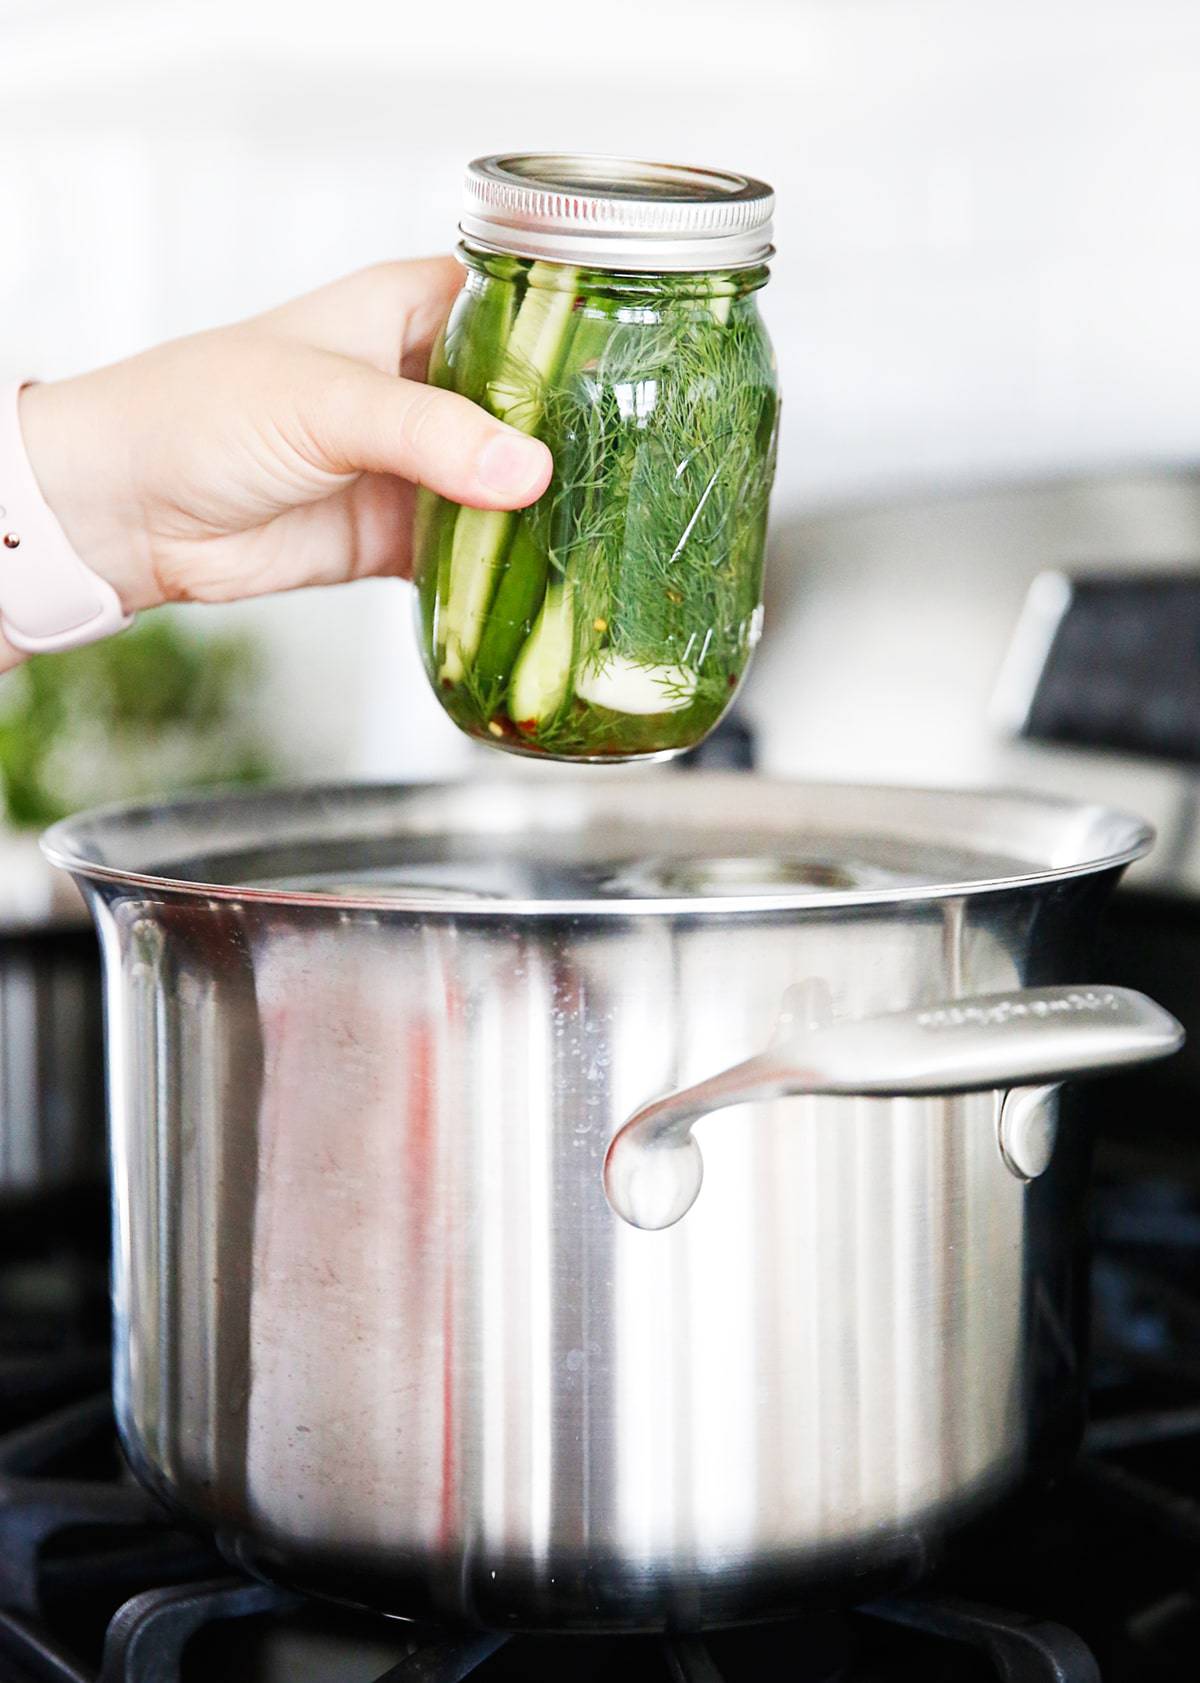 How to Make Quick Dill Pickles